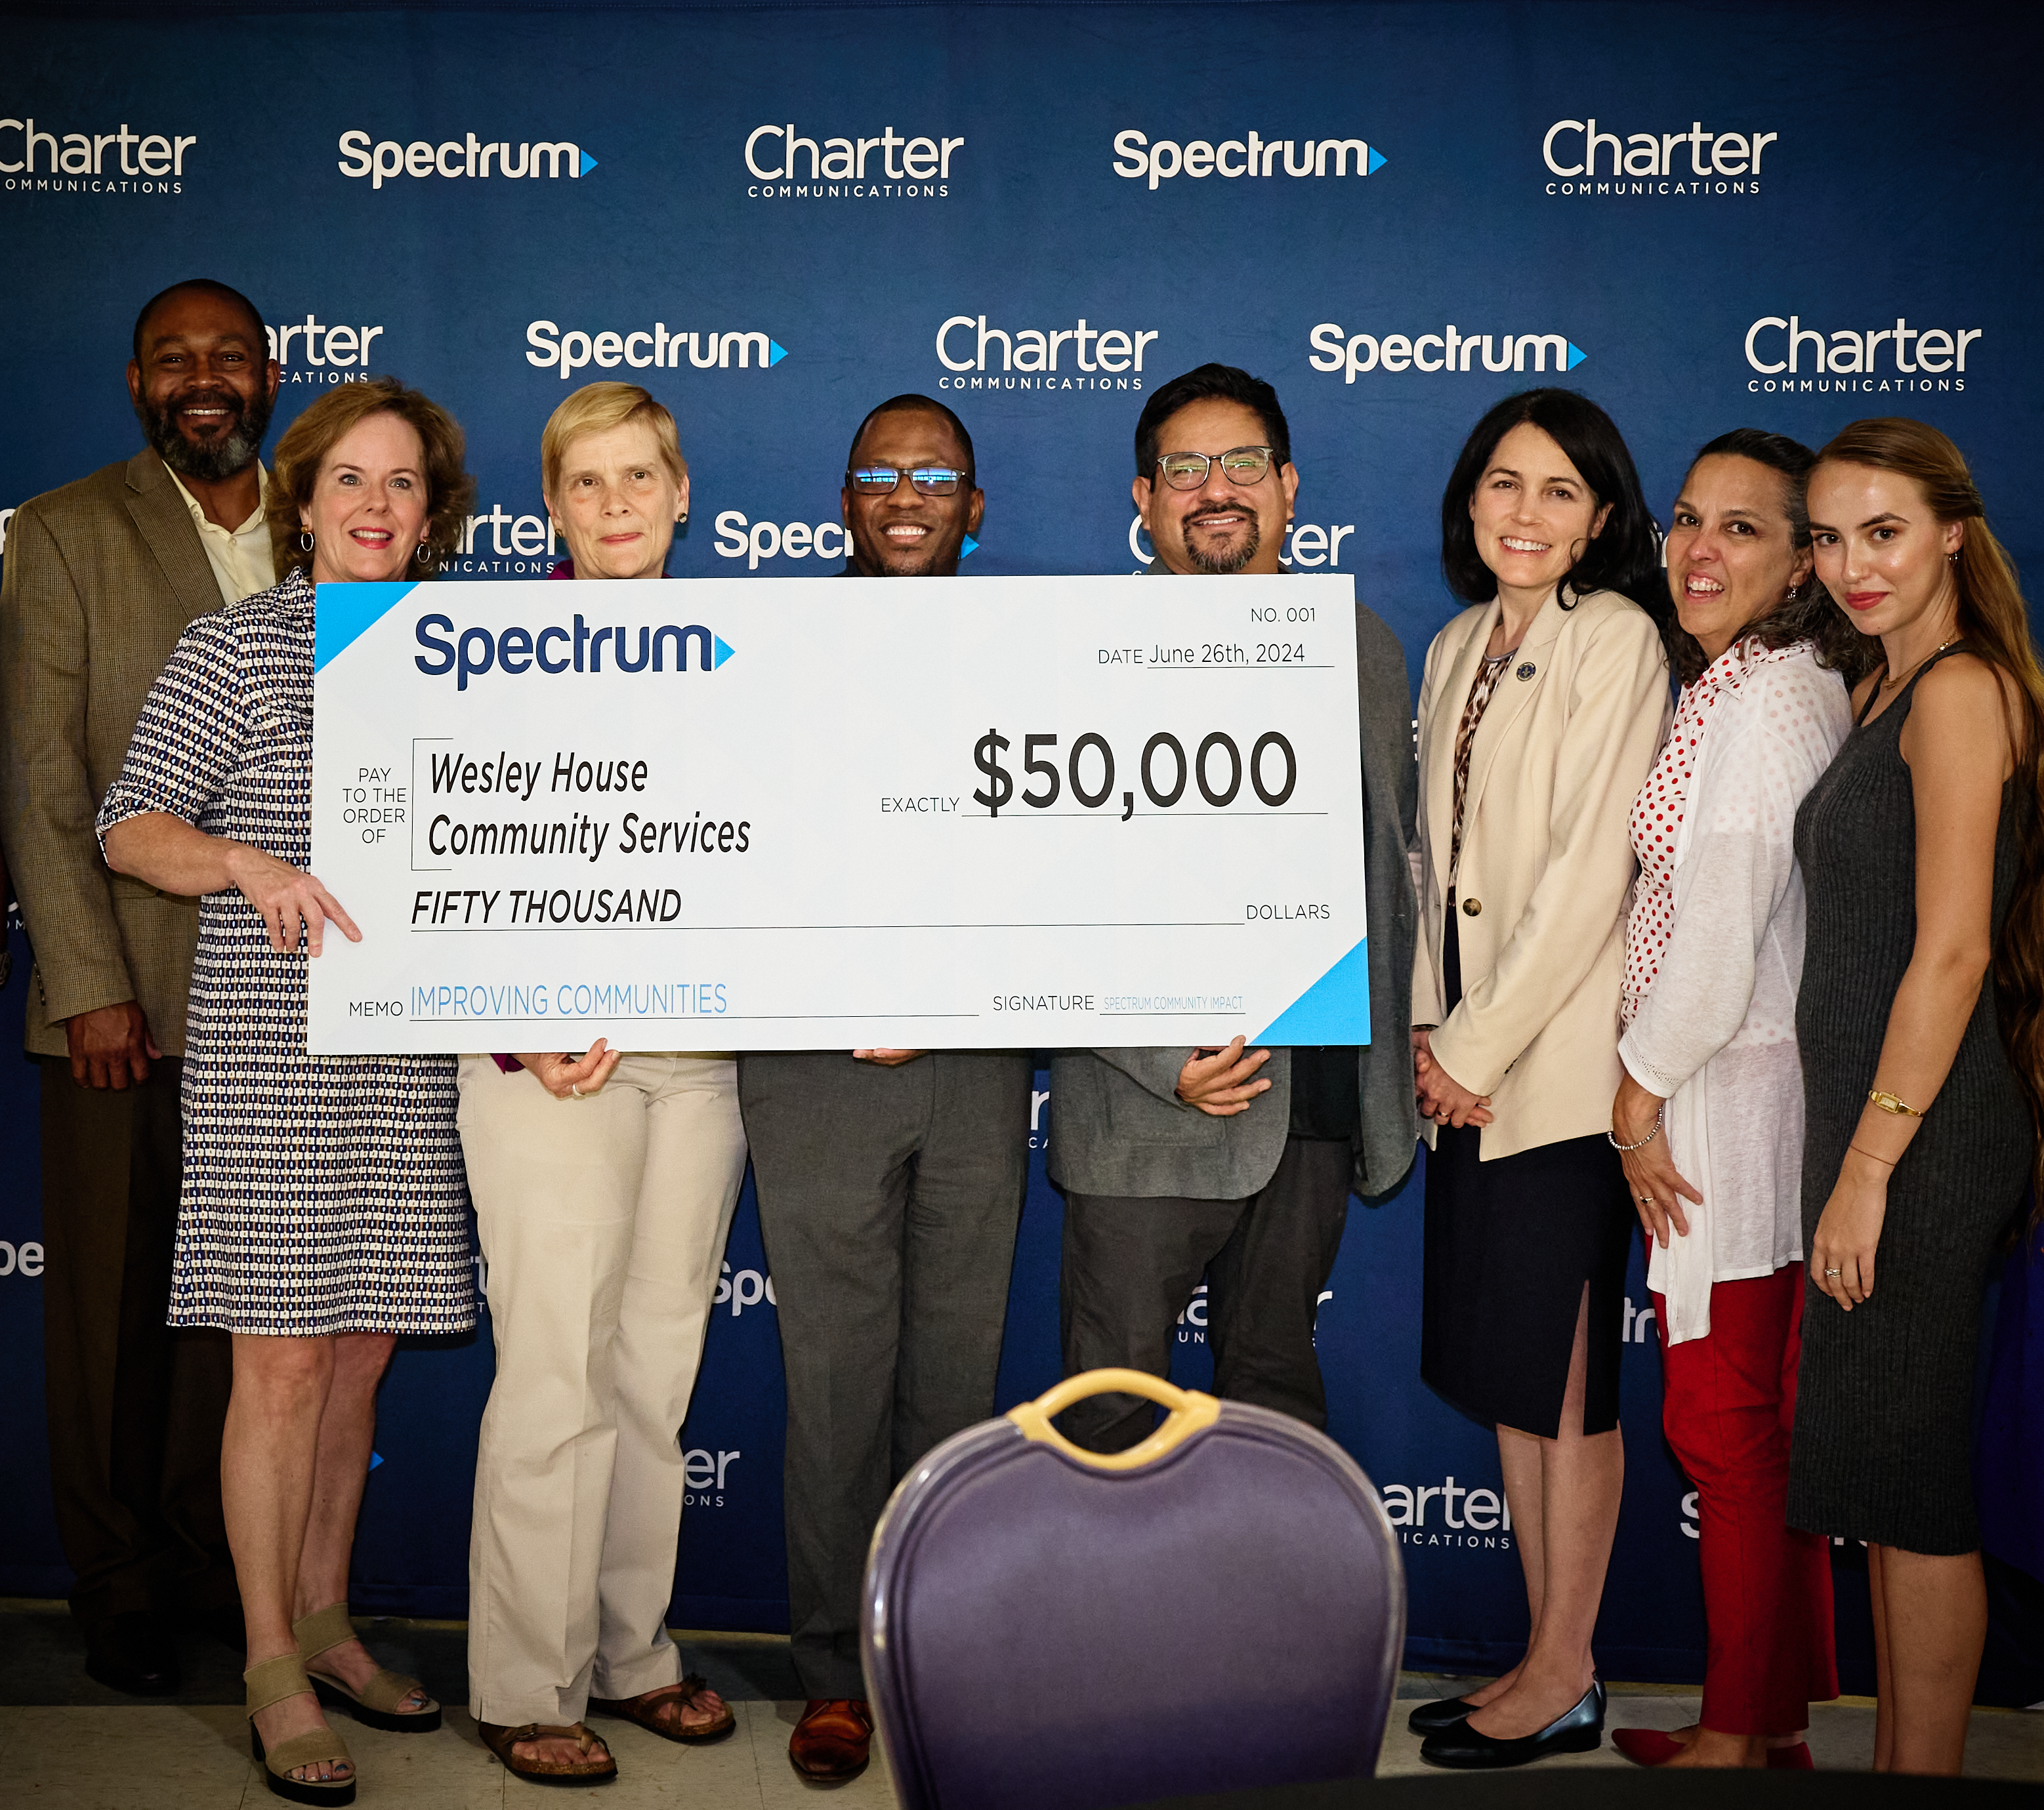 SPECTRUM ANNOUNCES ADDITIONAL $50,000 TO WESLEY HOUSE COMMUNITY SERVICES